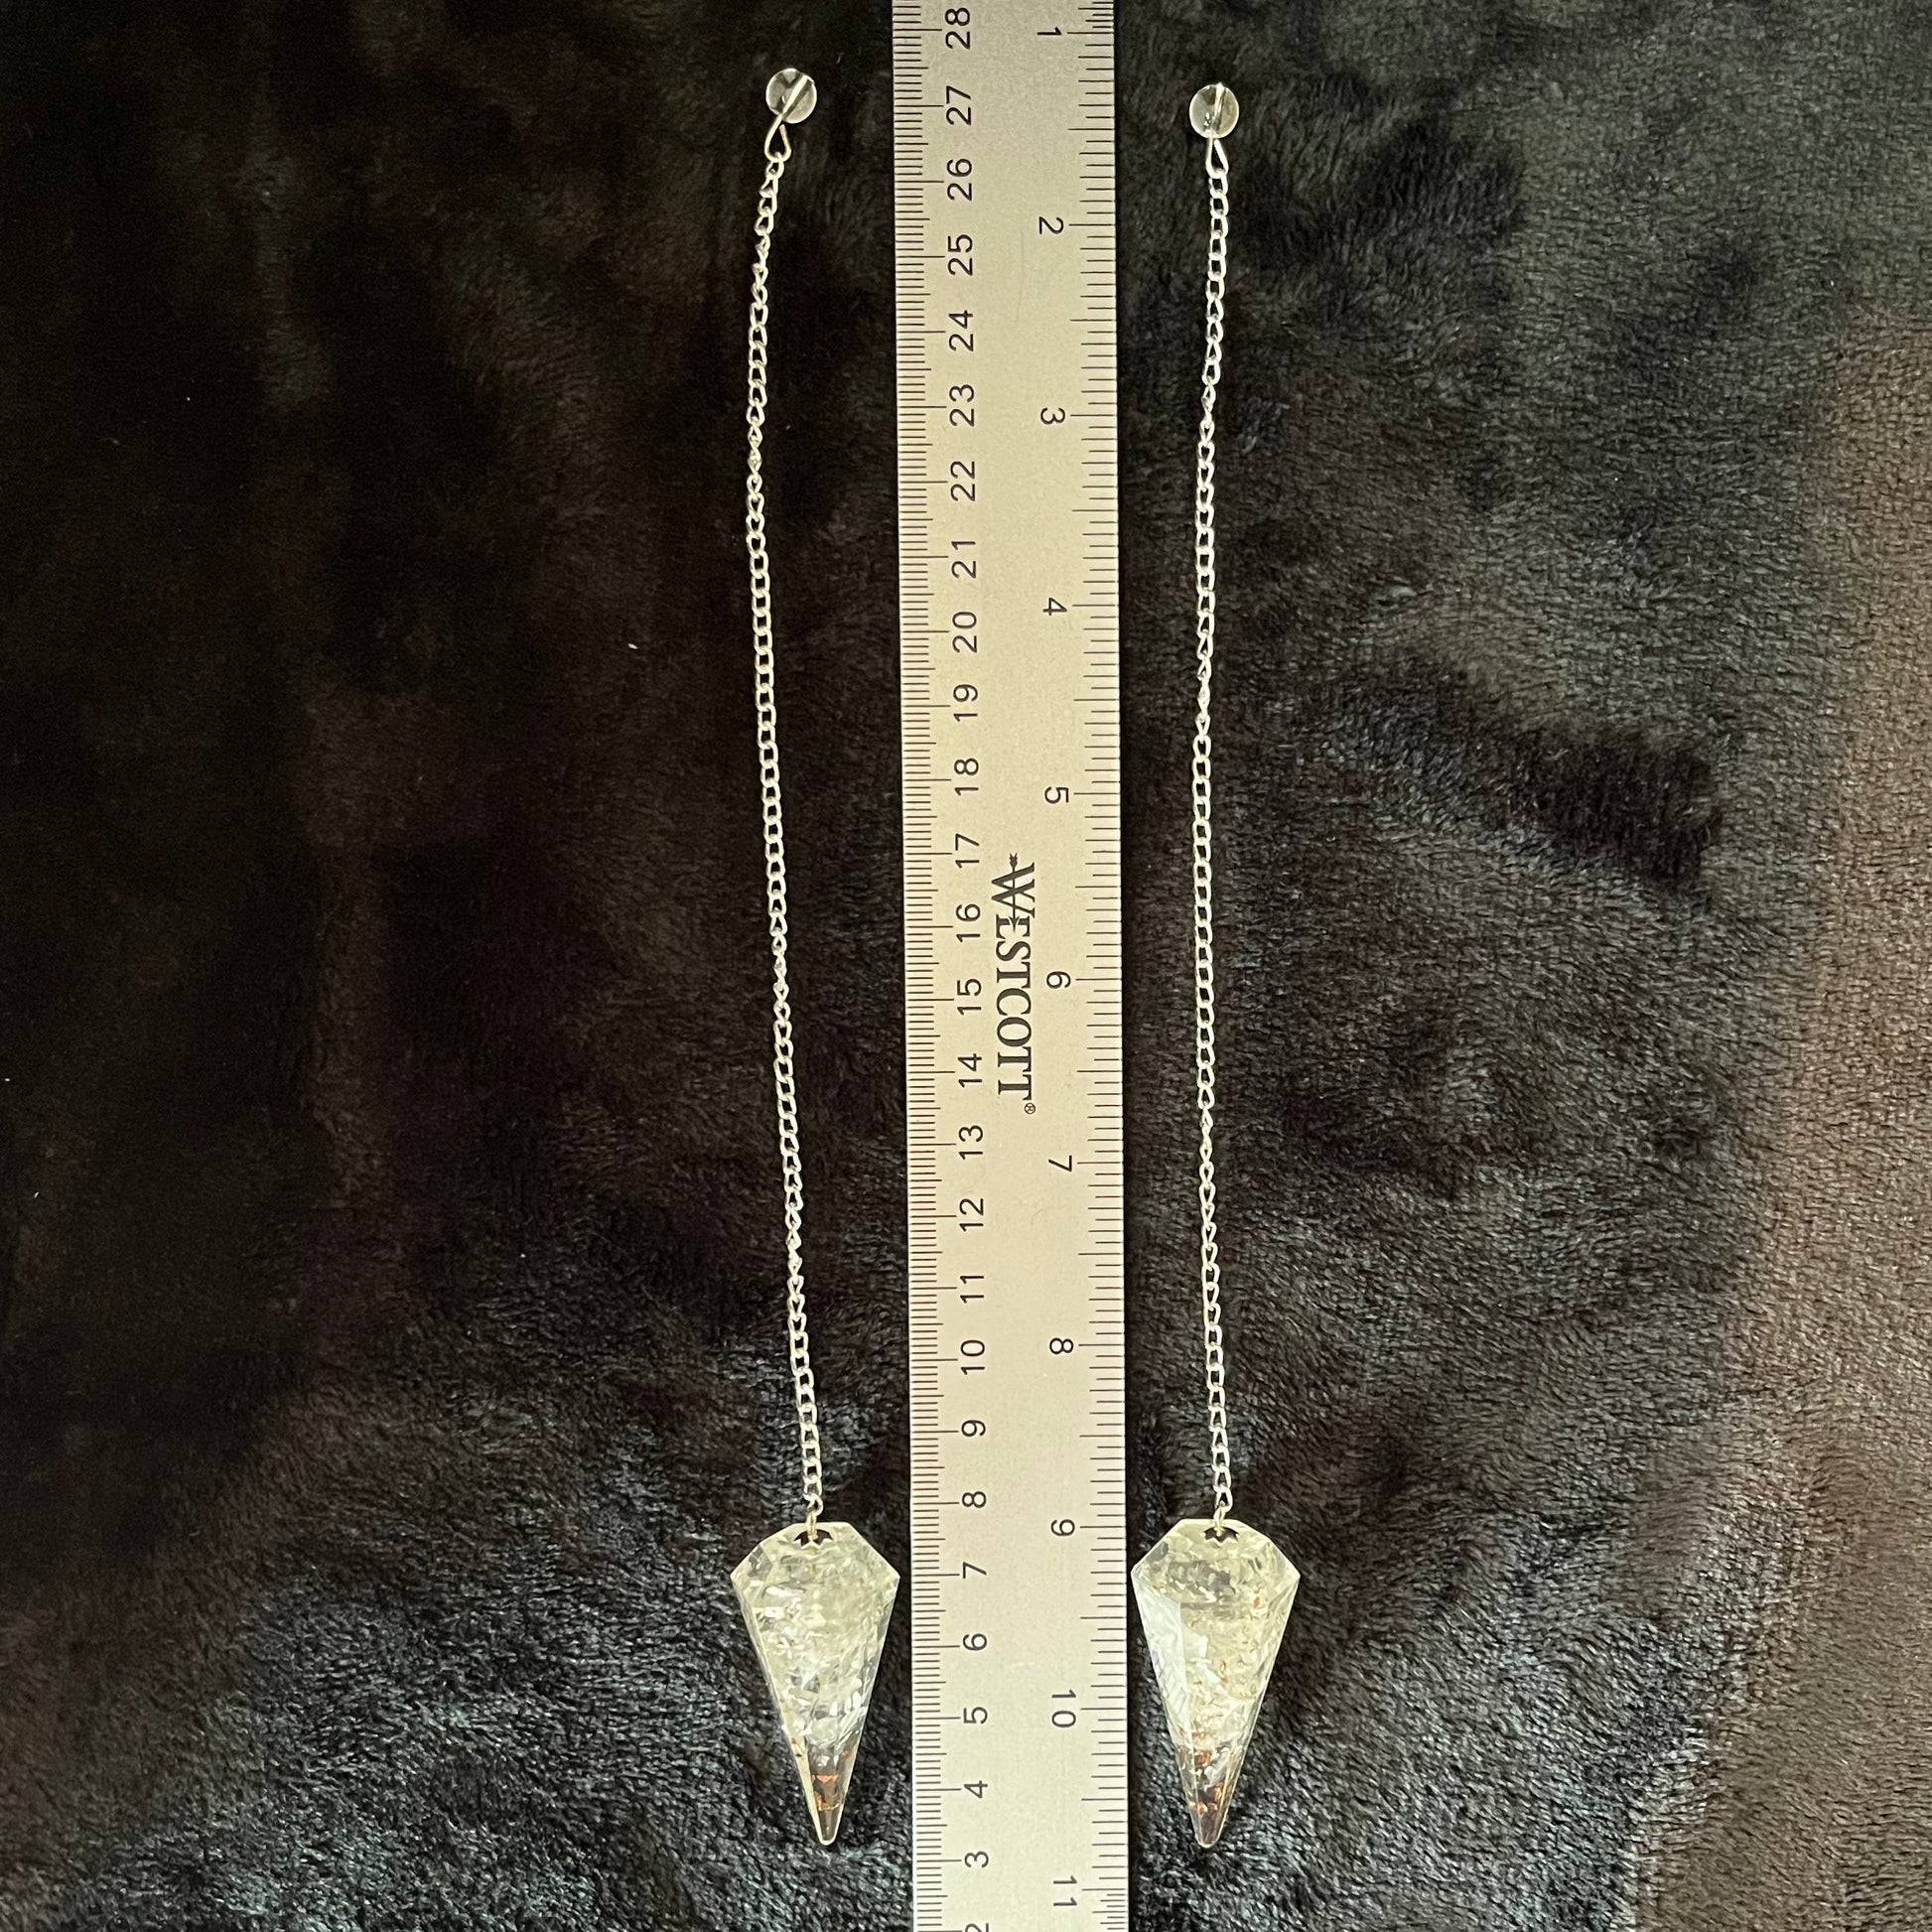 2 Quartz organite pendulums featuring a clear quartz crystal suspended in resin, designed for divination and energy work, displayed next to a ruler.  Quartz oraganite crystal point is approximately  1 3/4” long attatched to an 8” chain.